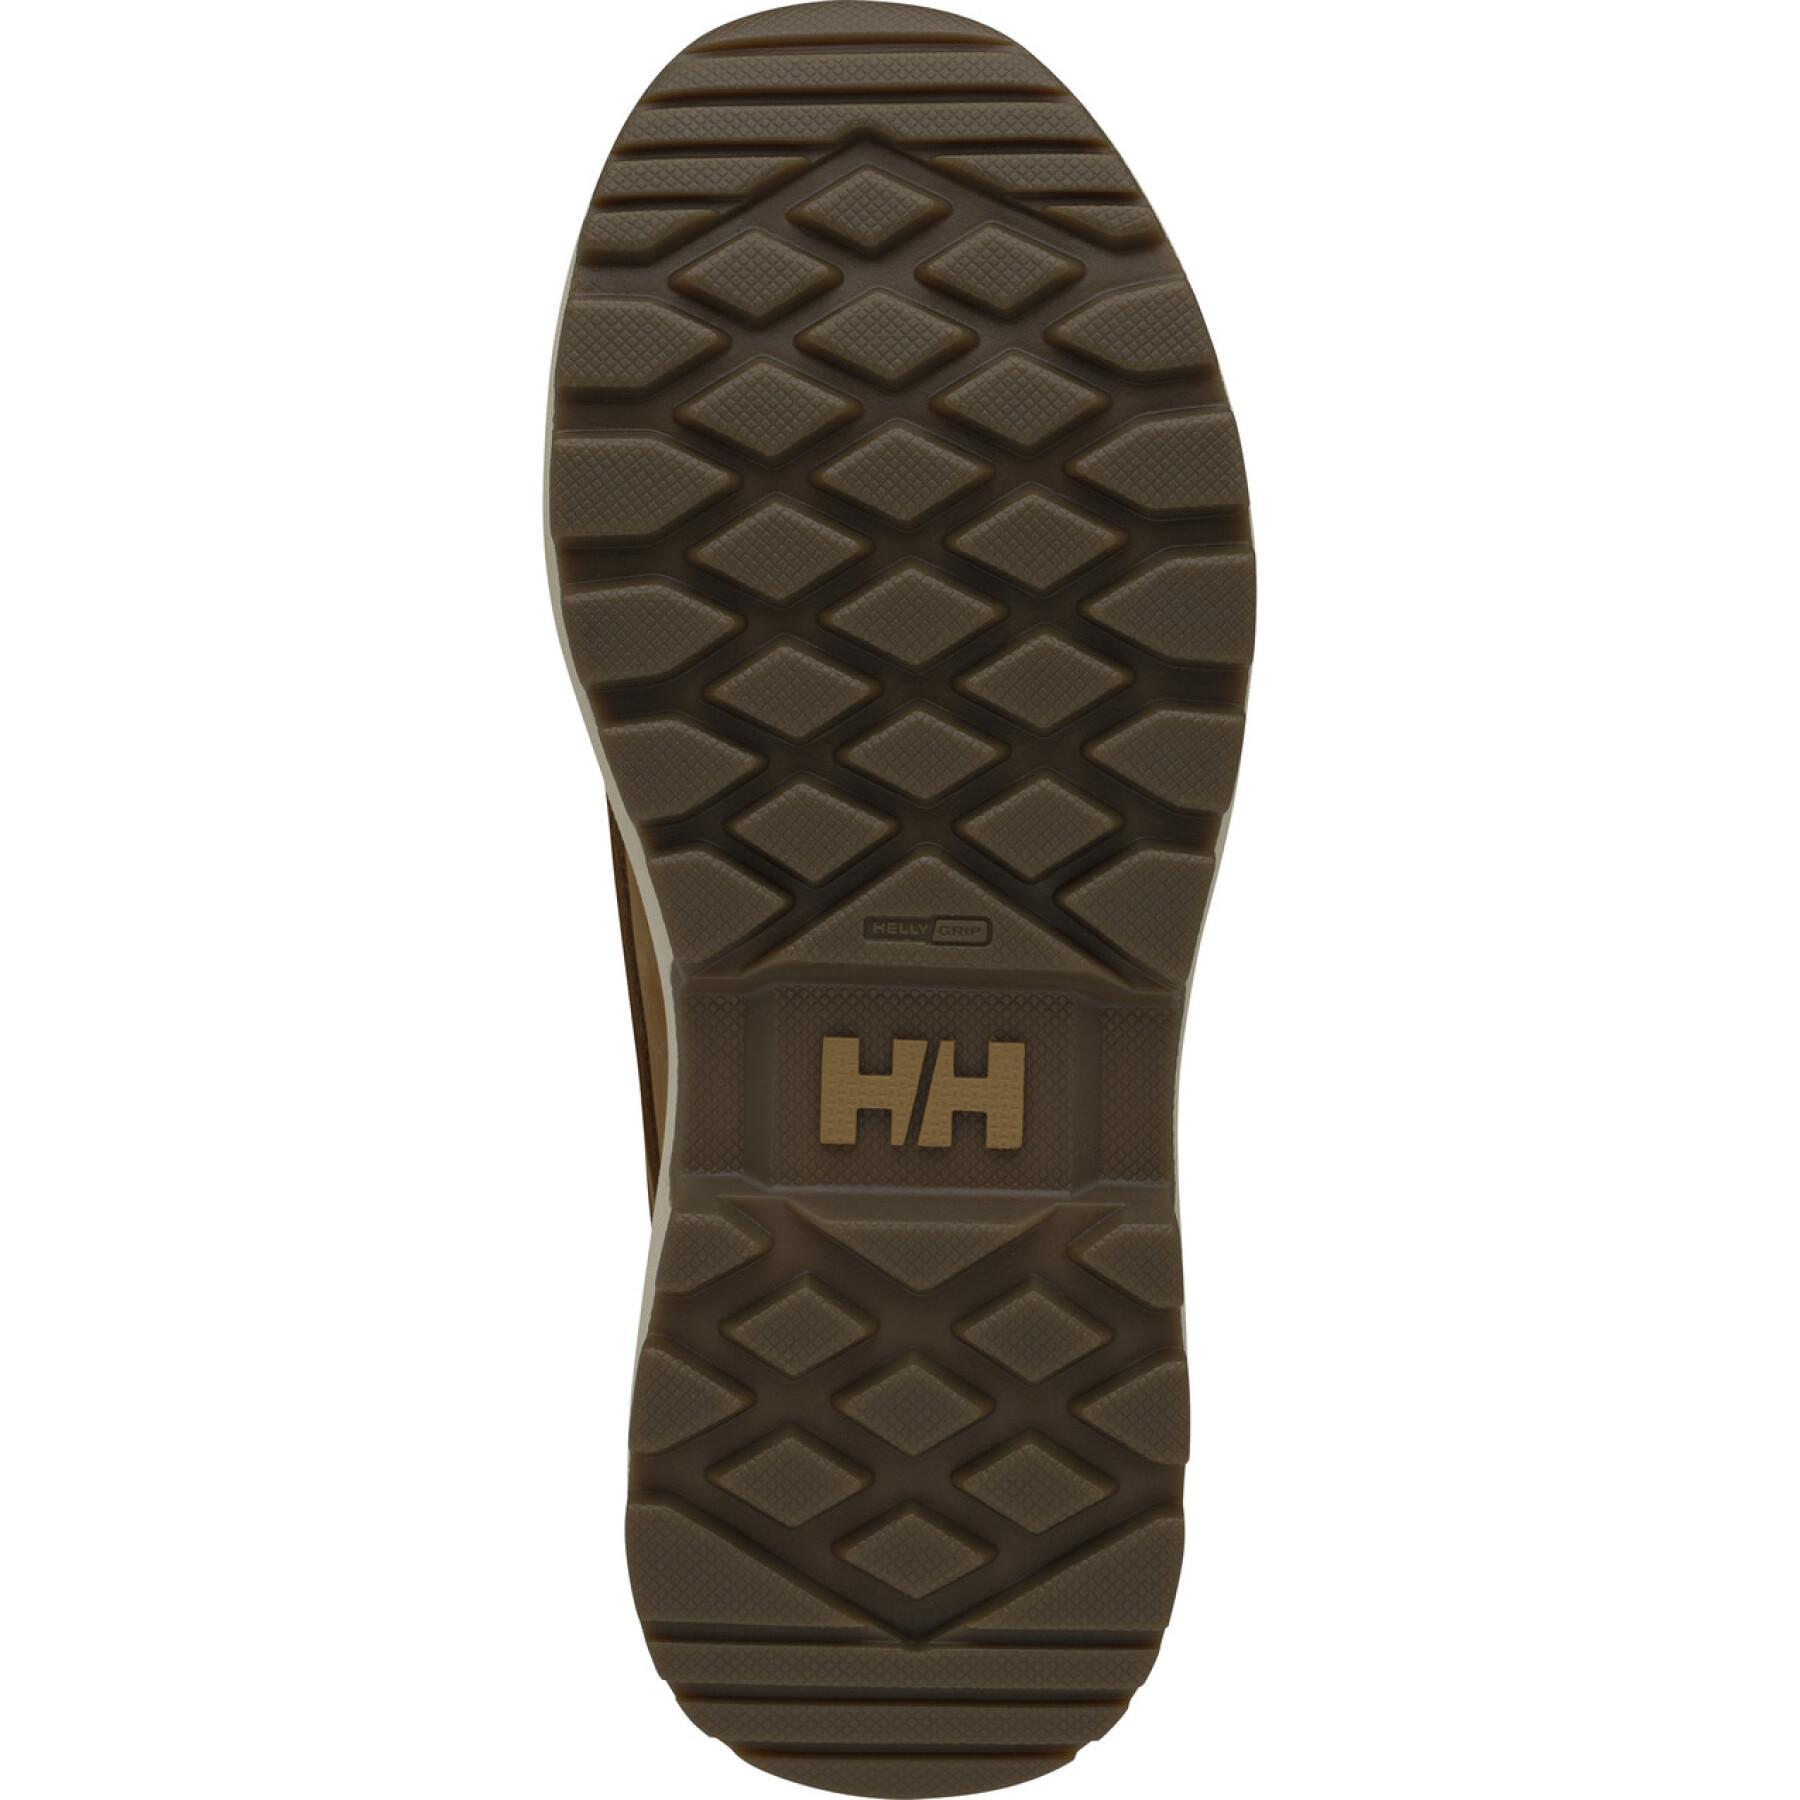 Women's hiking shoes Helly Hansen Bowstring